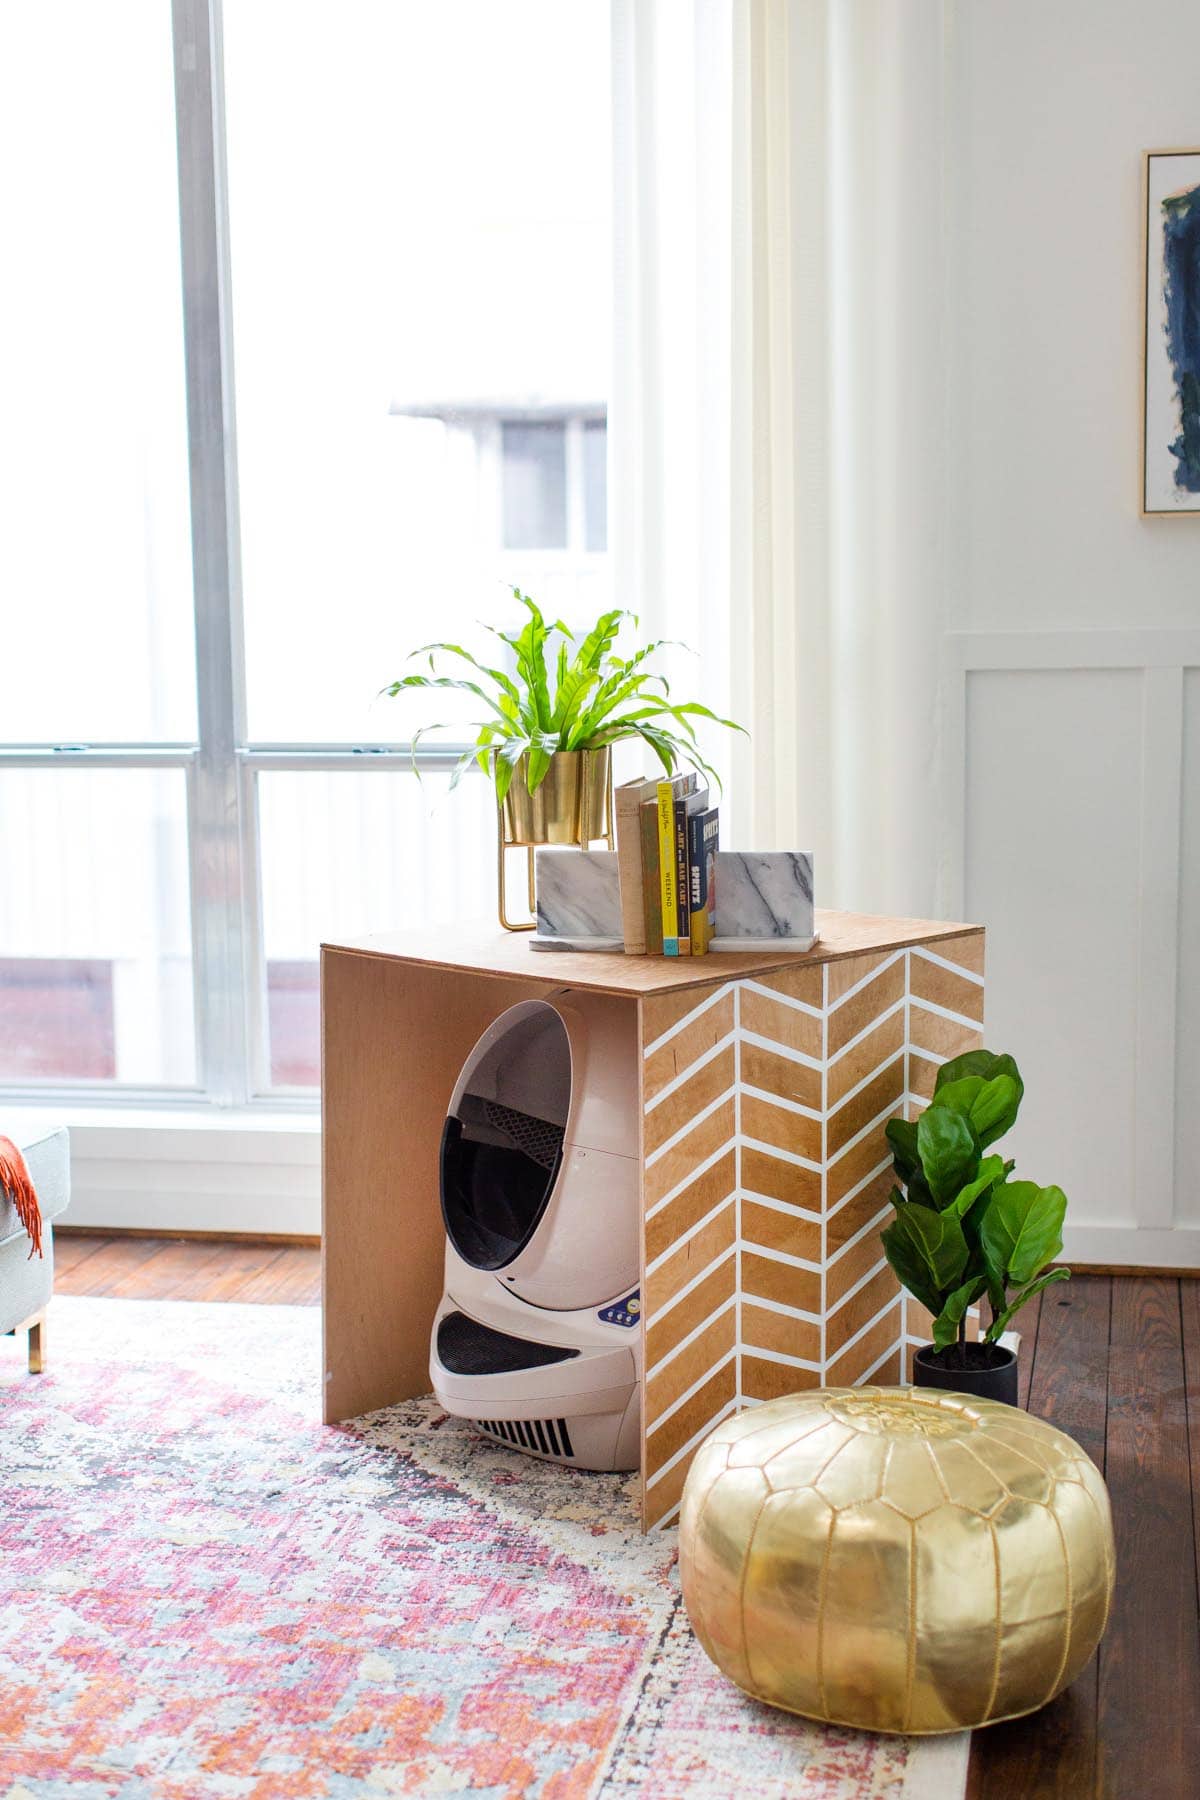 Patterned DIY Litter Box Cover by Top Houston Blogger Ashley Rose of Sugar & Cloth